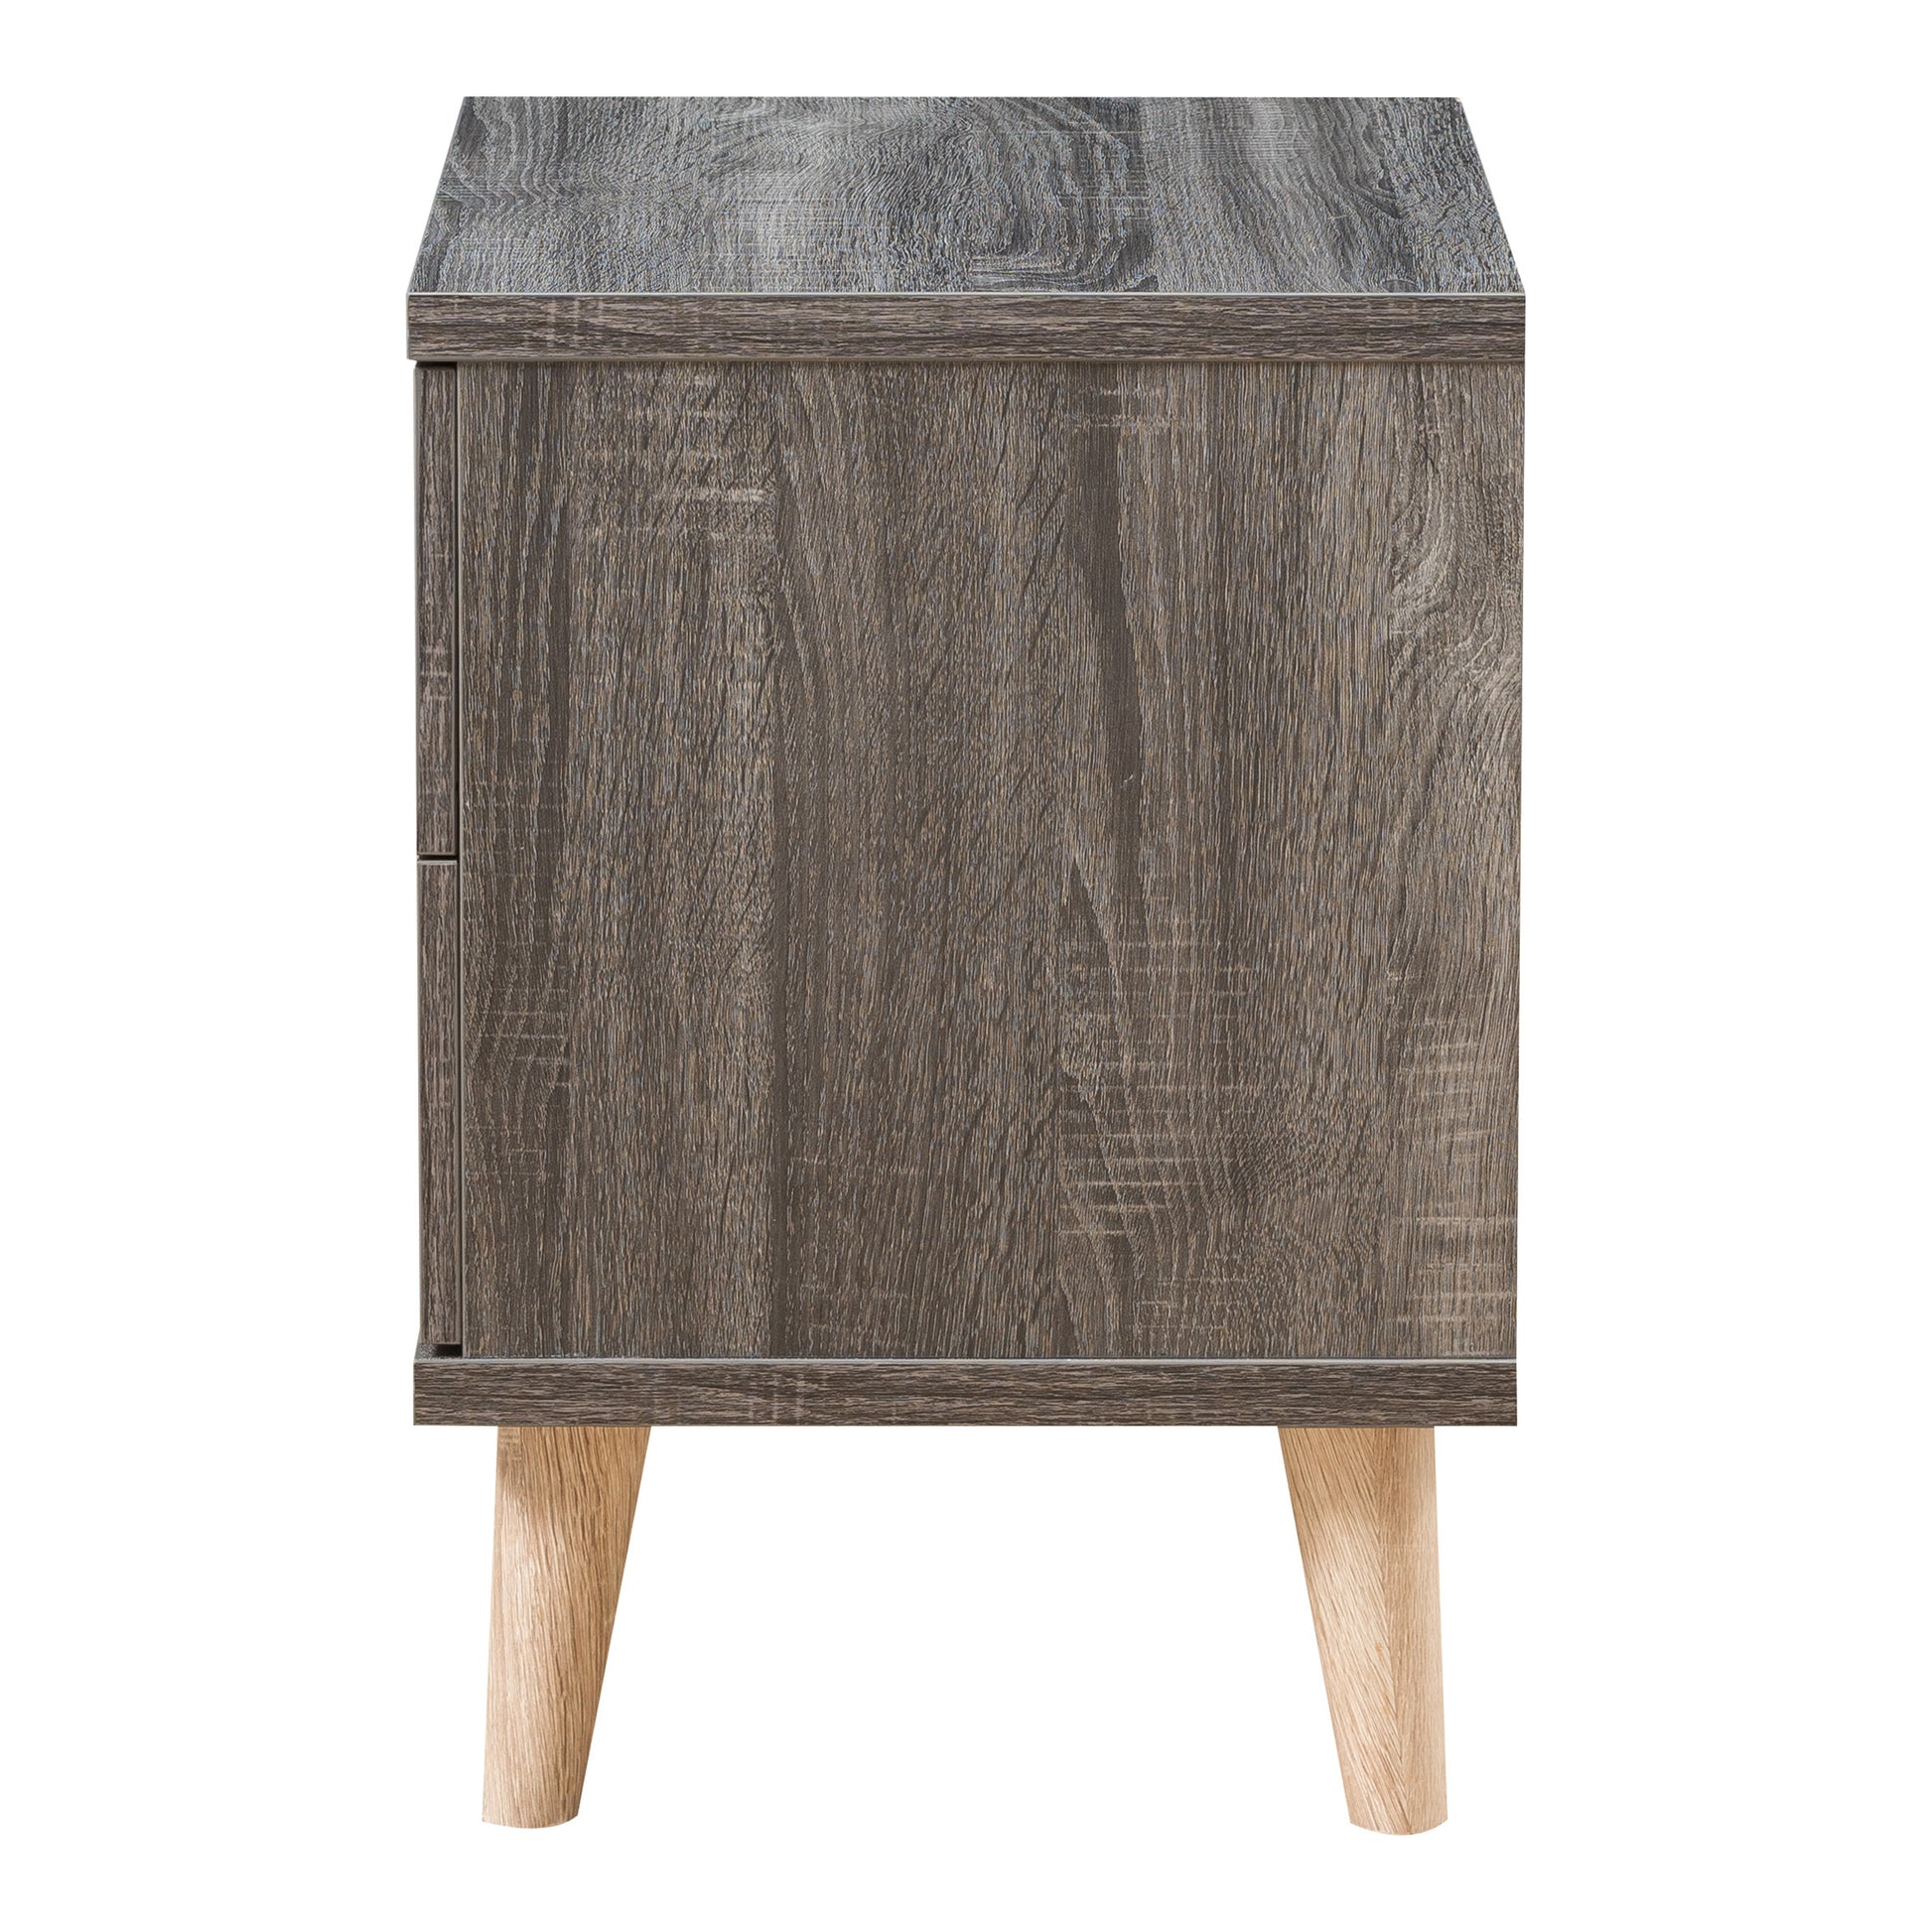 Front-facing side view of a mid-century modern distressed gray two-drawer nightstand on a white background